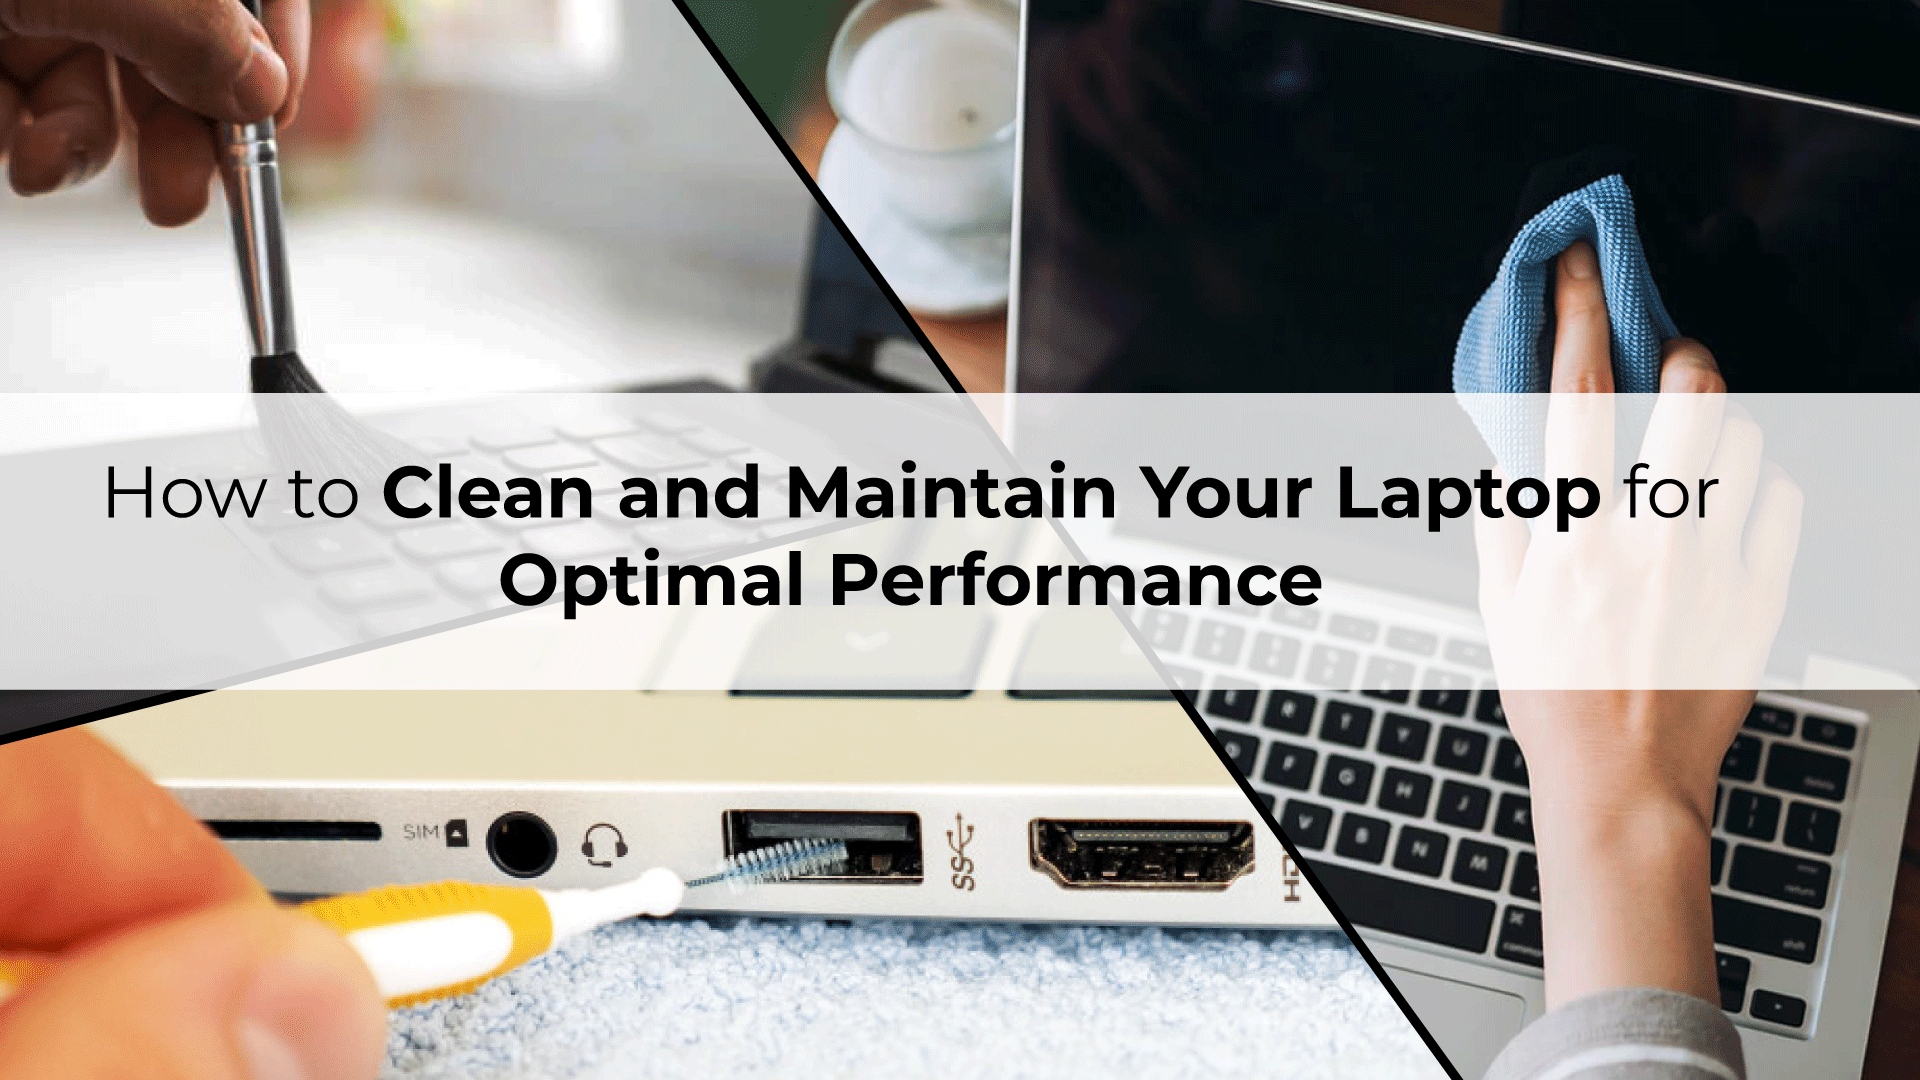 How to Clean and Maintain Your Laptop for Optimal Performance